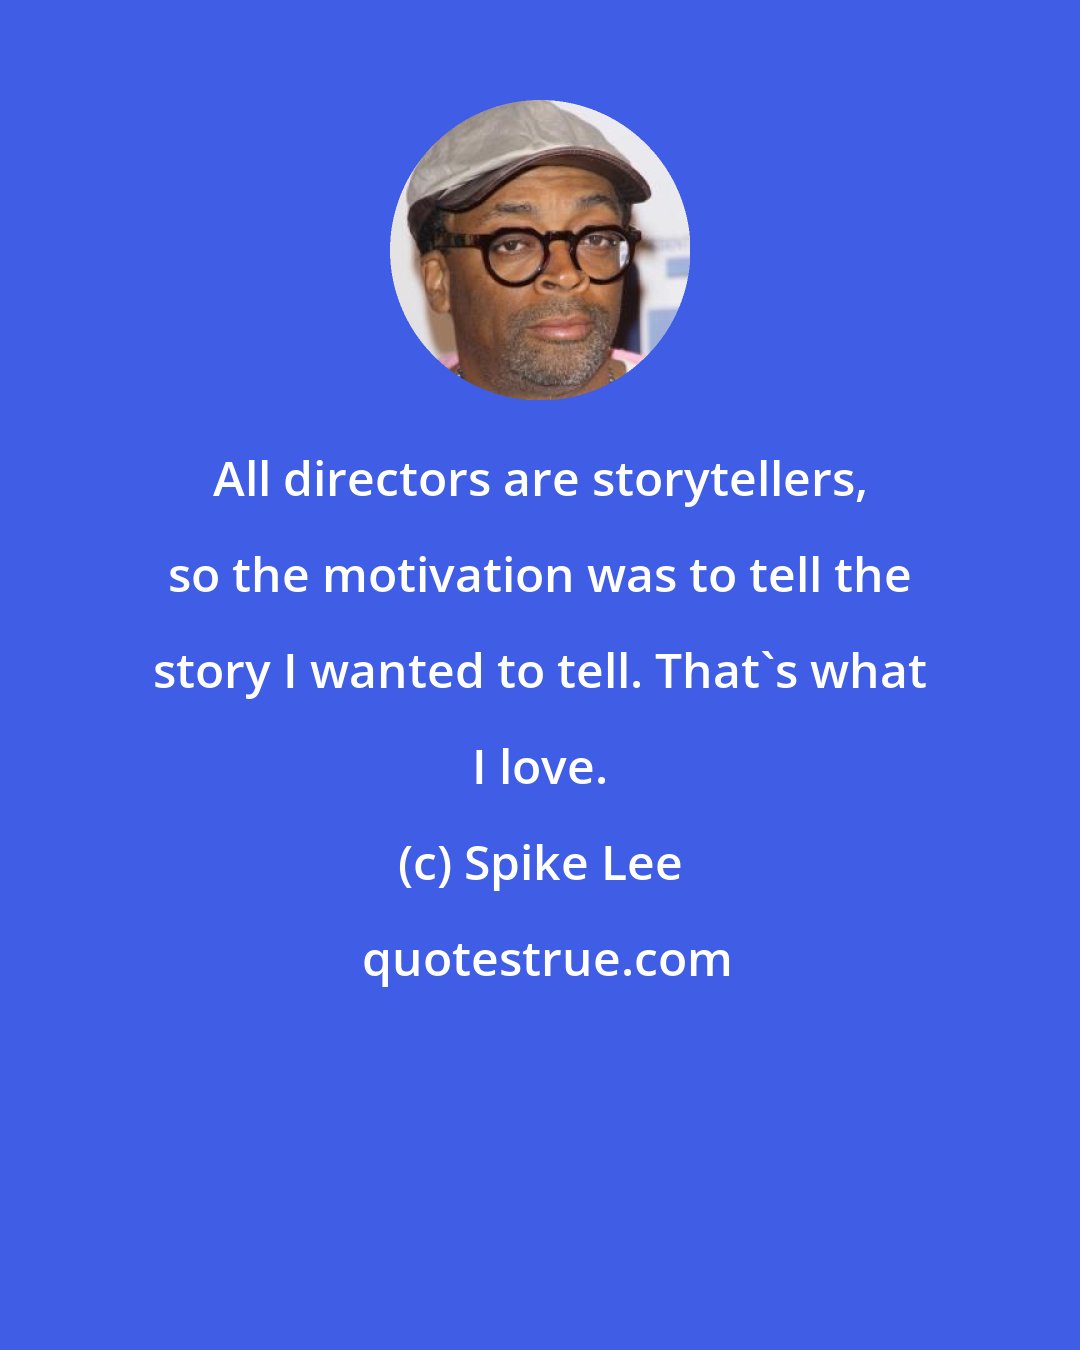 Spike Lee: All directors are storytellers, so the motivation was to tell the story I wanted to tell. That's what I love.